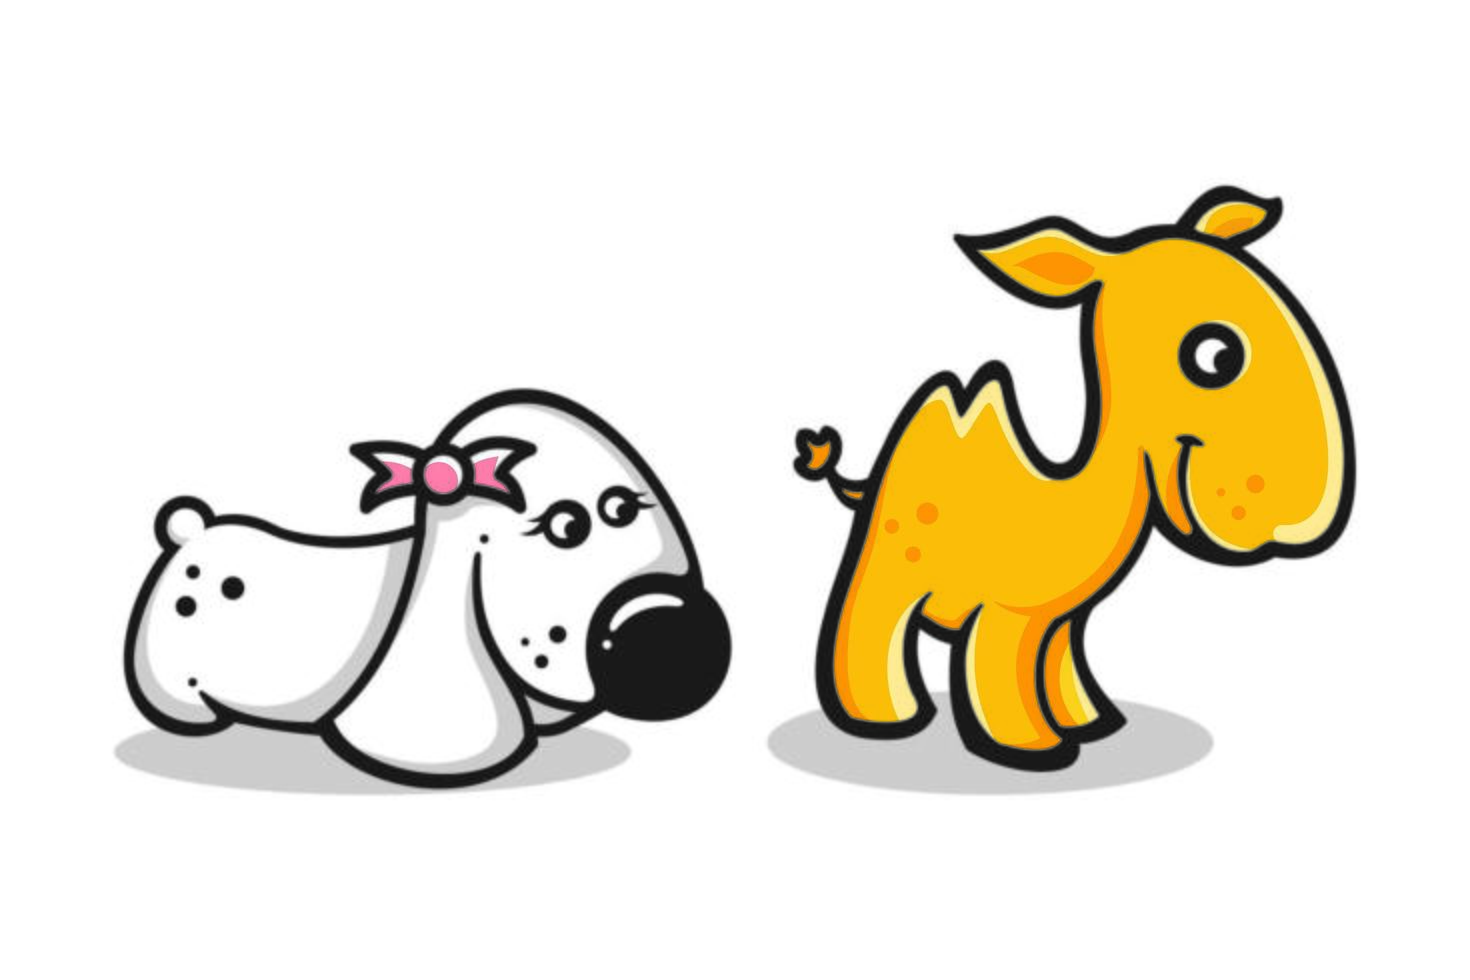 Set of cute cartoon baby dogs and camels vector